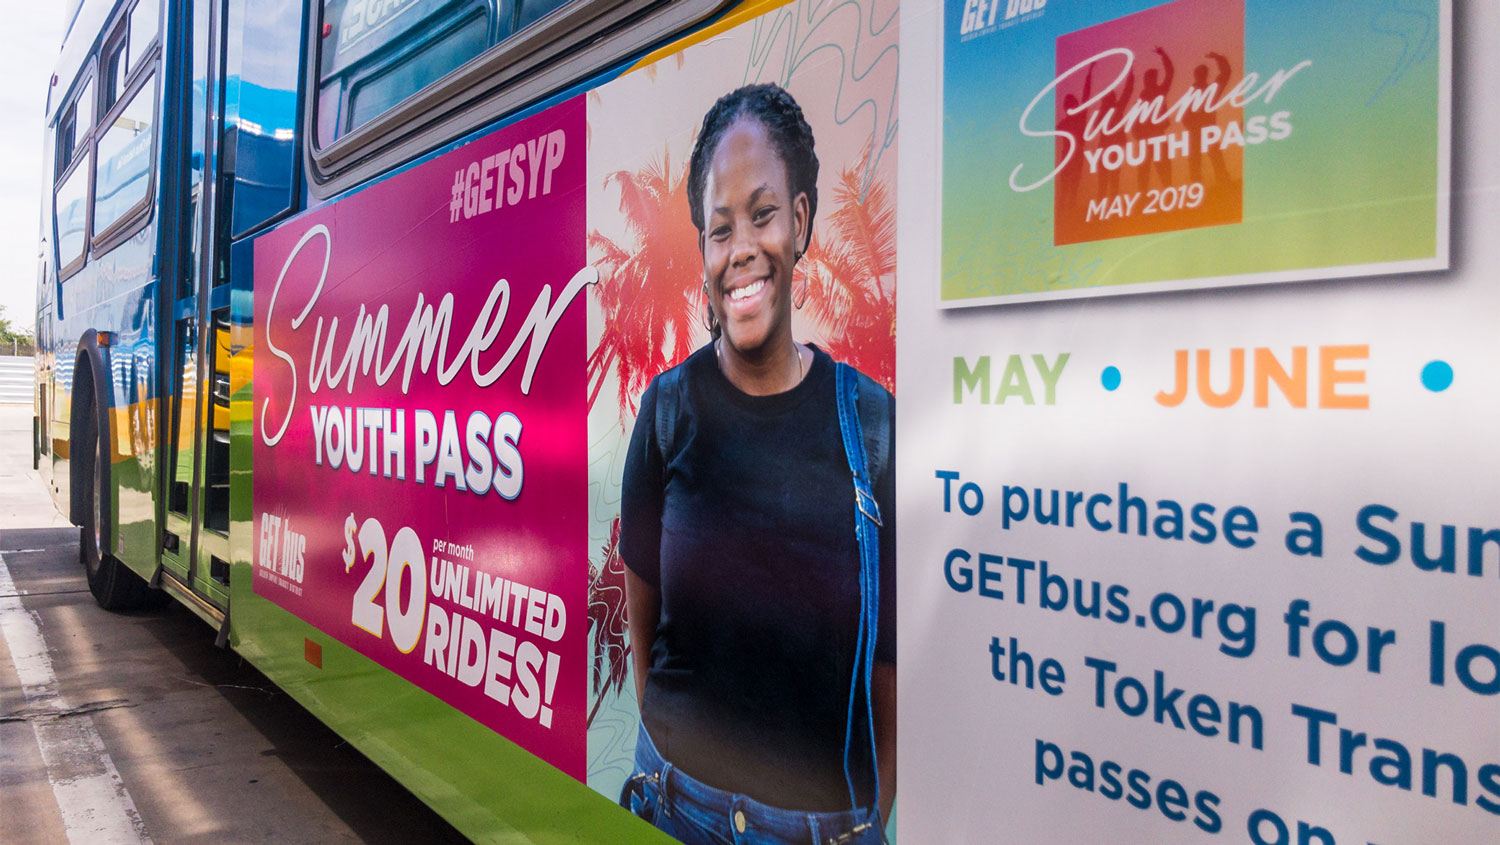 News Release: Summer Youth Pass 2019